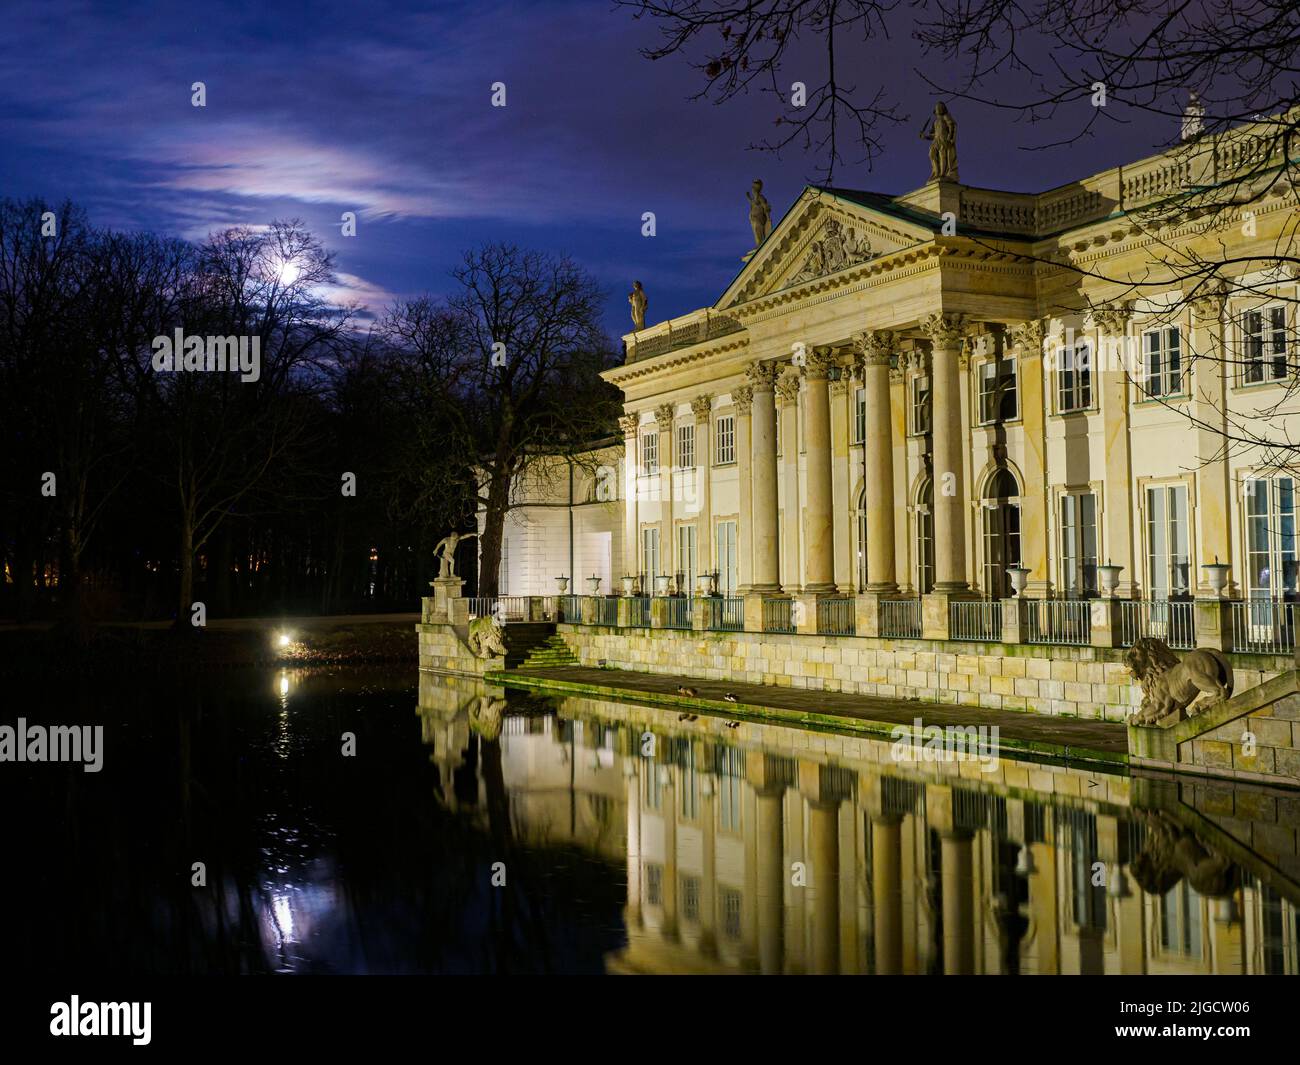 Warsaw, Poland - June 01, 2019: The northern façade of the Palace on the Isle in Royal Baths Park in night tiem. Baths Park, Lazienki Park. Stock Photo